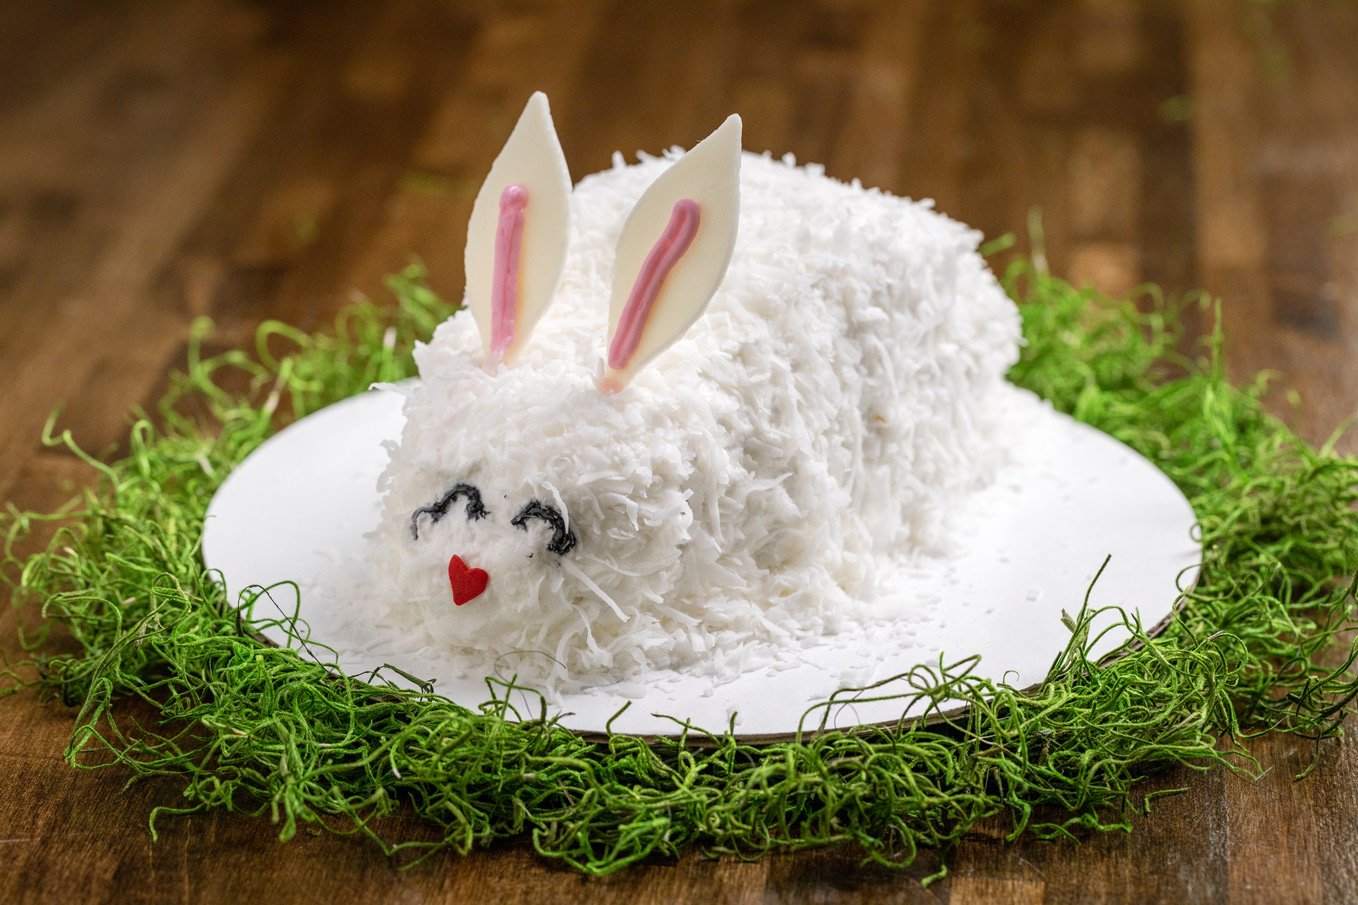 Bunny Cake available for order from 4 Rivers Smokehouse